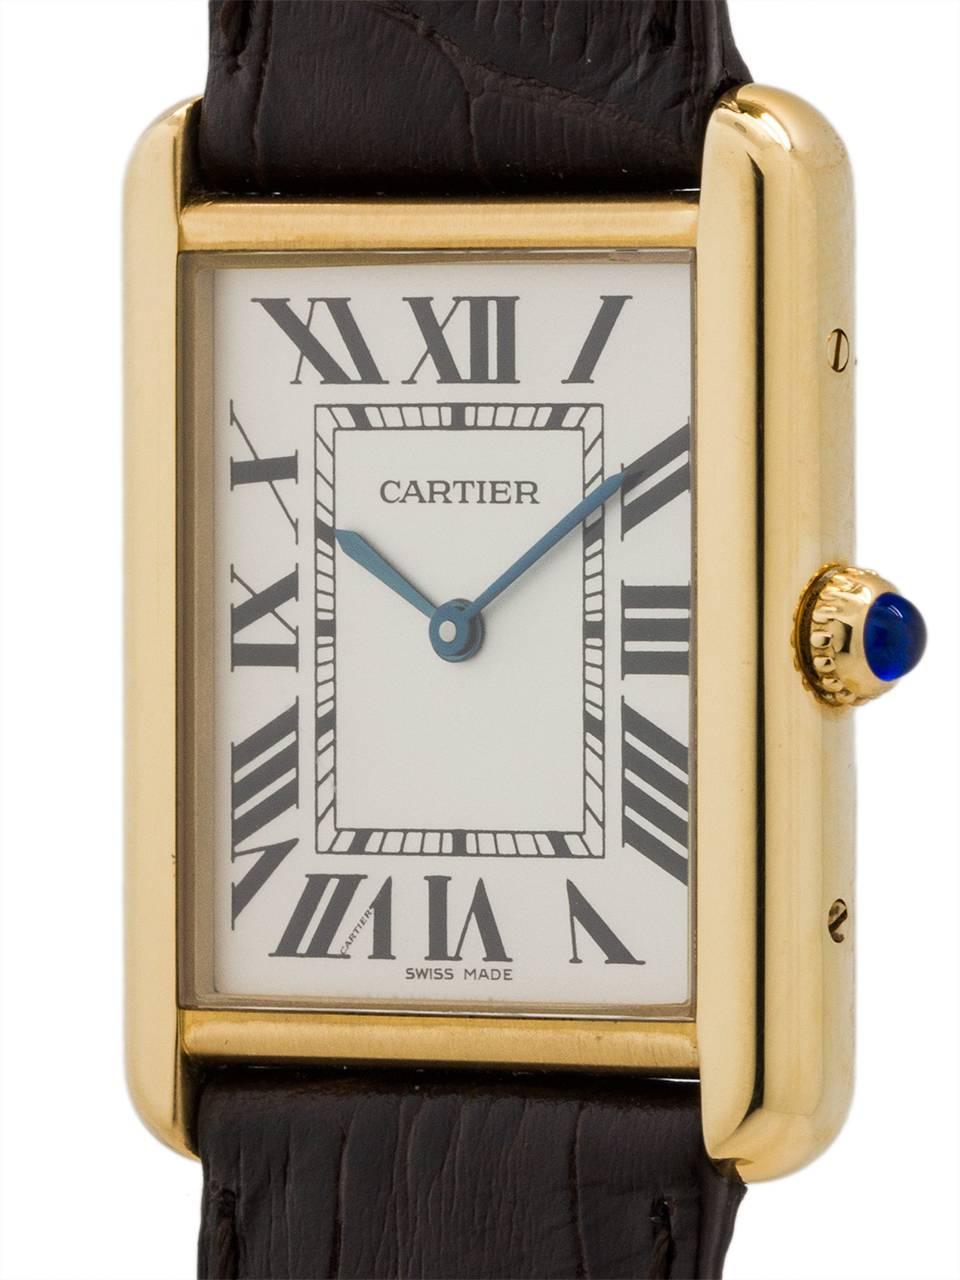 
Man’s Cartier Tank Solo ref# 2472 with 18K YG solid gold top and stainless steel back secured by 4 side and 4 case back screws. Featuring 27 X 34mm case with scratch resistant sapphire crystal, cabochon sapphire crown, and silver opaline dial with